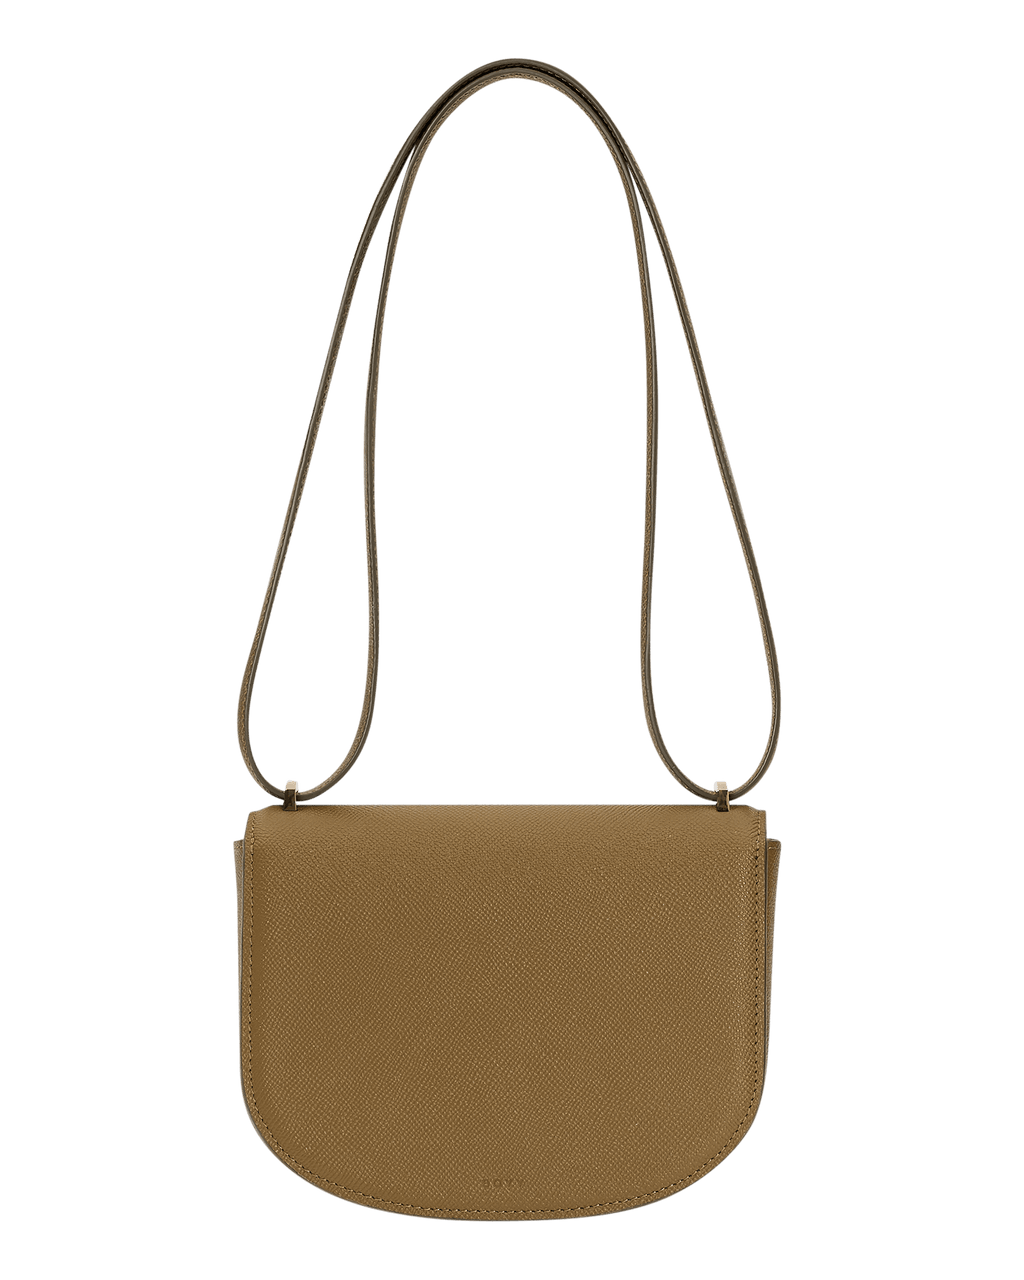 Over The Moon Other Leathers - Handbags